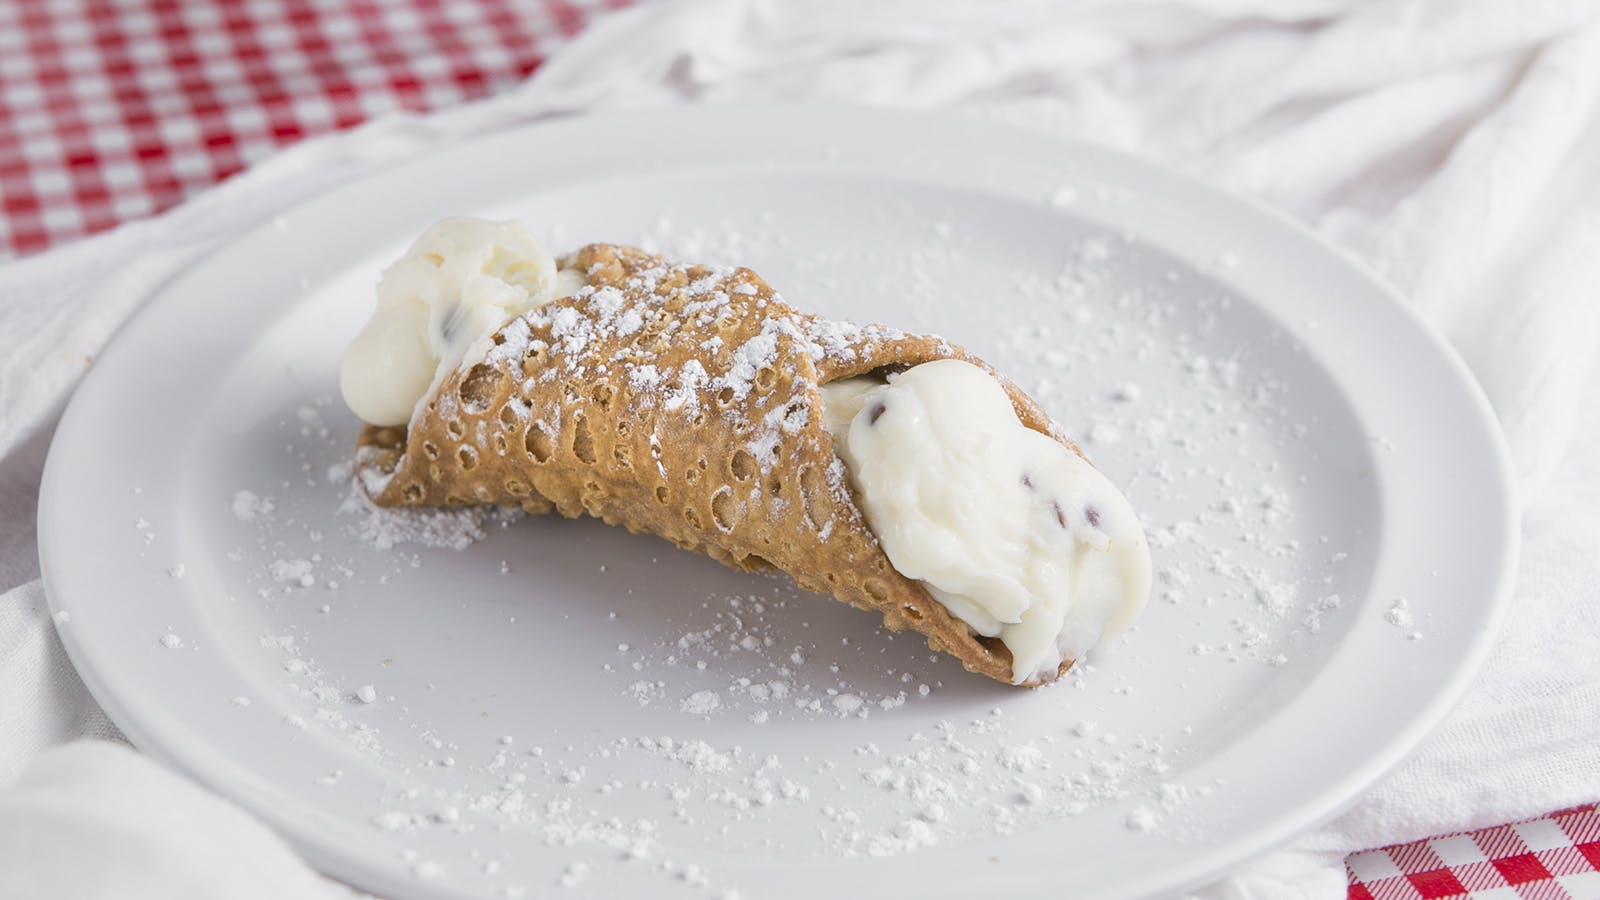 Cannoli from Ameci Pizza & Pasta - Lake Forest in Lake Forest, CA